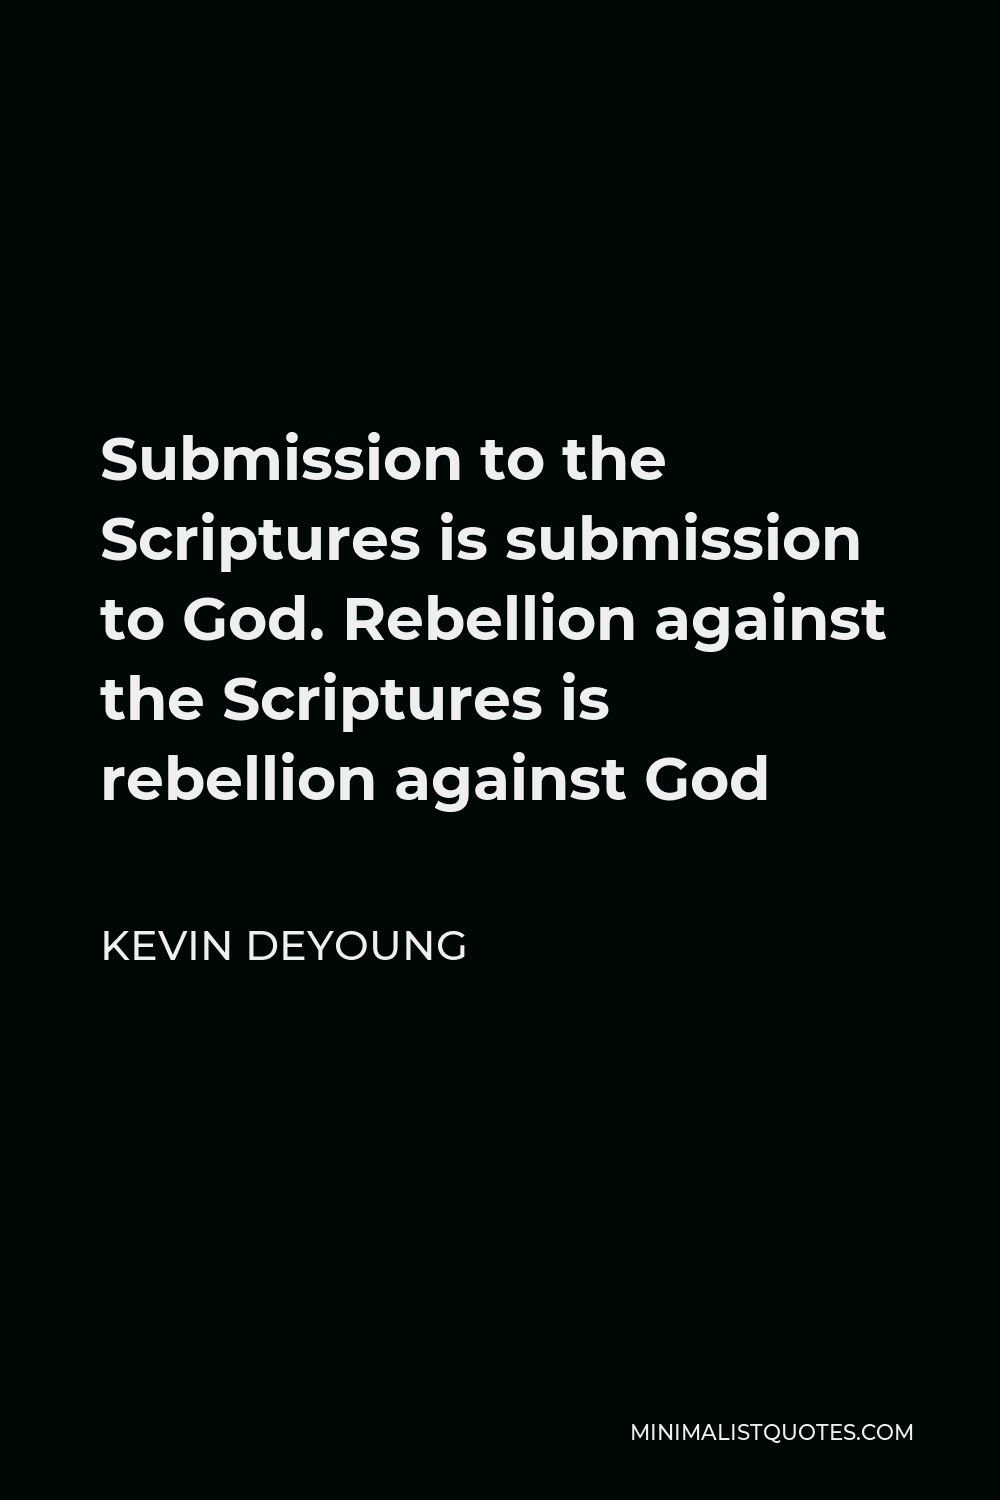 Kevin DeYoung Quote - Submission to the Scriptures is submission to God. Rebellion against the Scriptures is rebellion against God